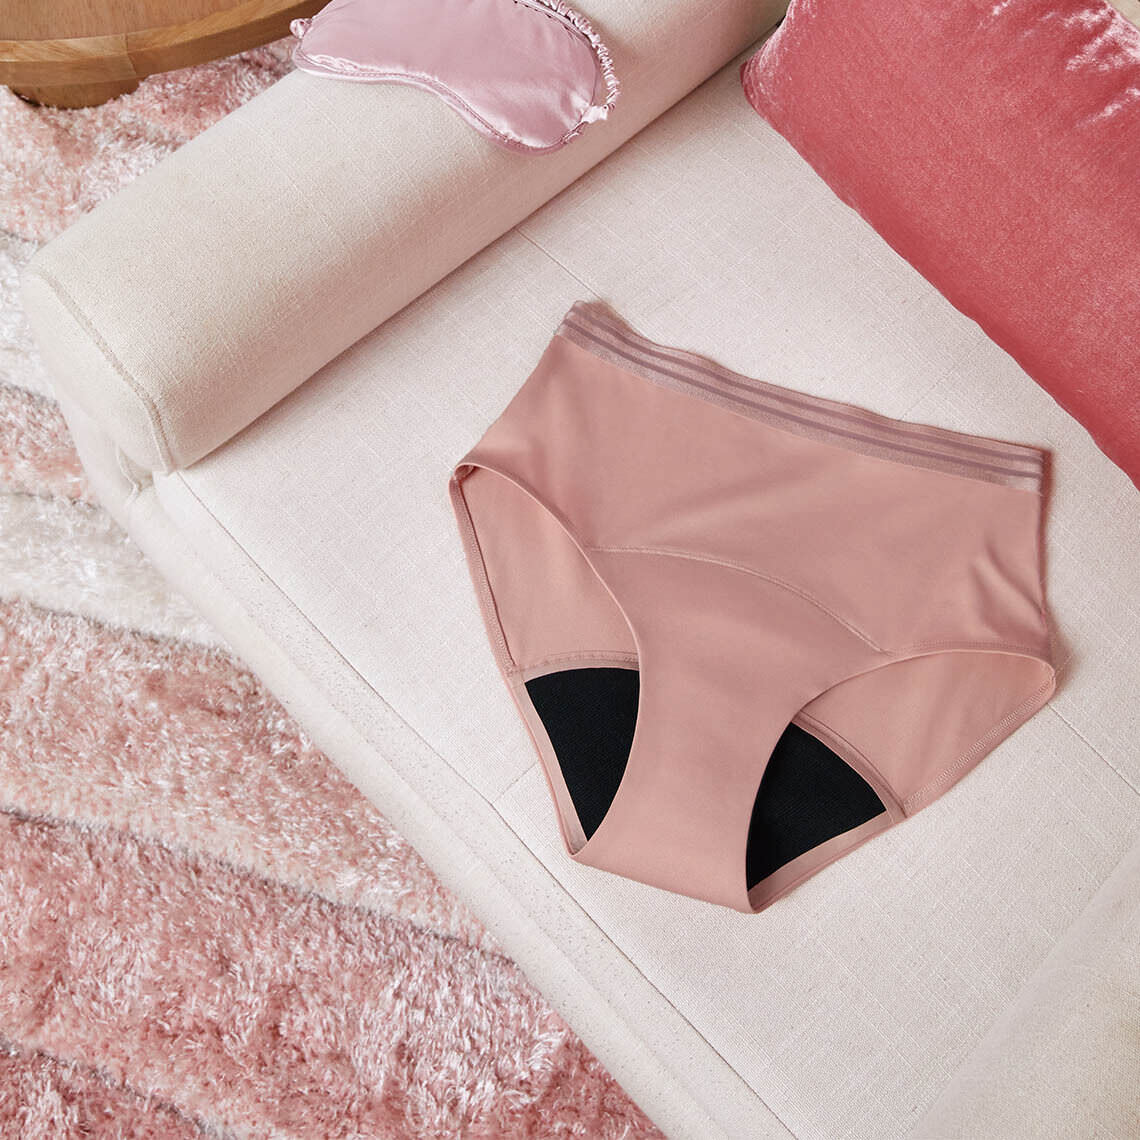 This Is What Happens If You Wear A Panty Liner Every Day